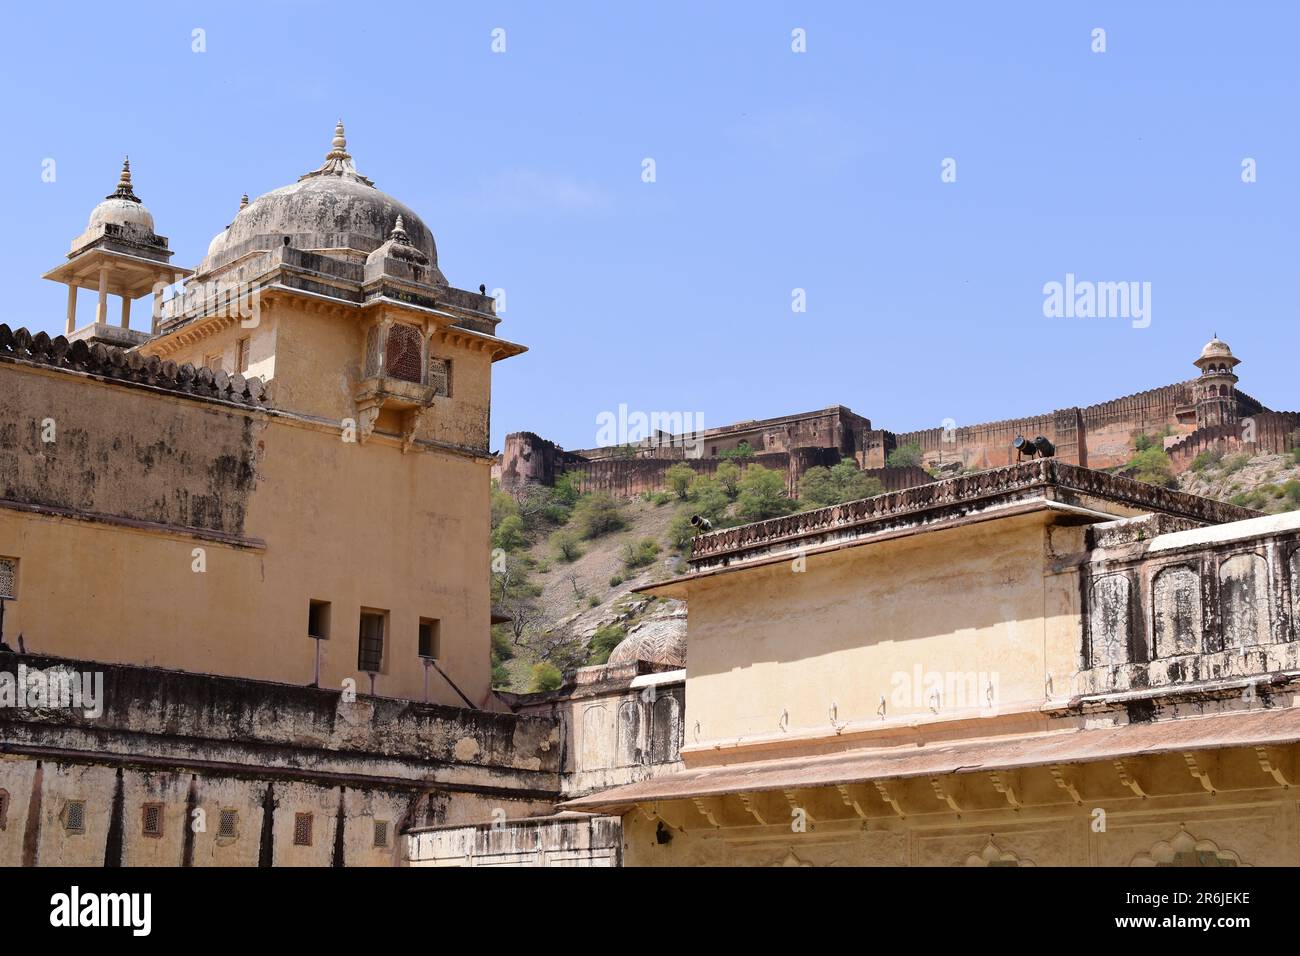 View of the fourth courtyard of Amber Palace in the foreground and the Jaigarh fort in the background. Stock Photo